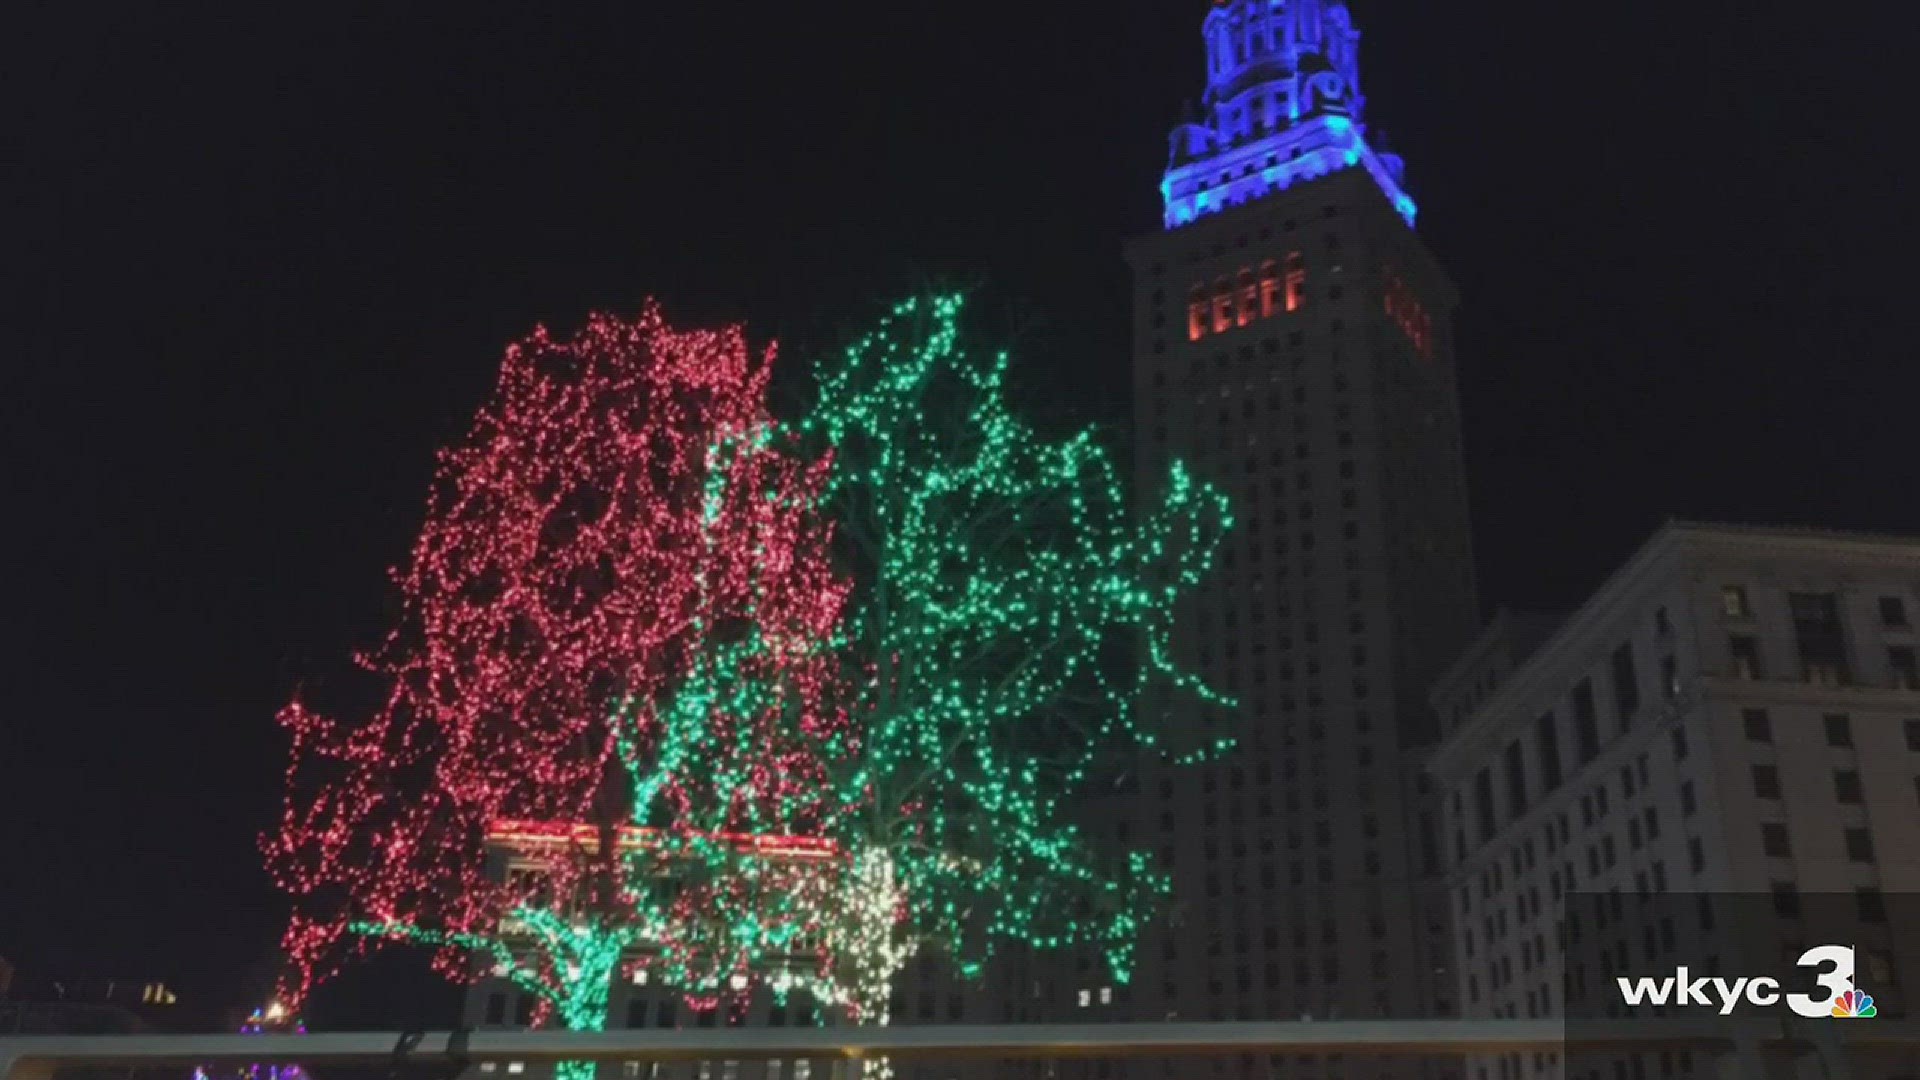 Dec. 1, 2017: Are you in the holiday spirit? Downtown Cleveland certainly is. Check out the beautiful Christmas decorations in Public Square.